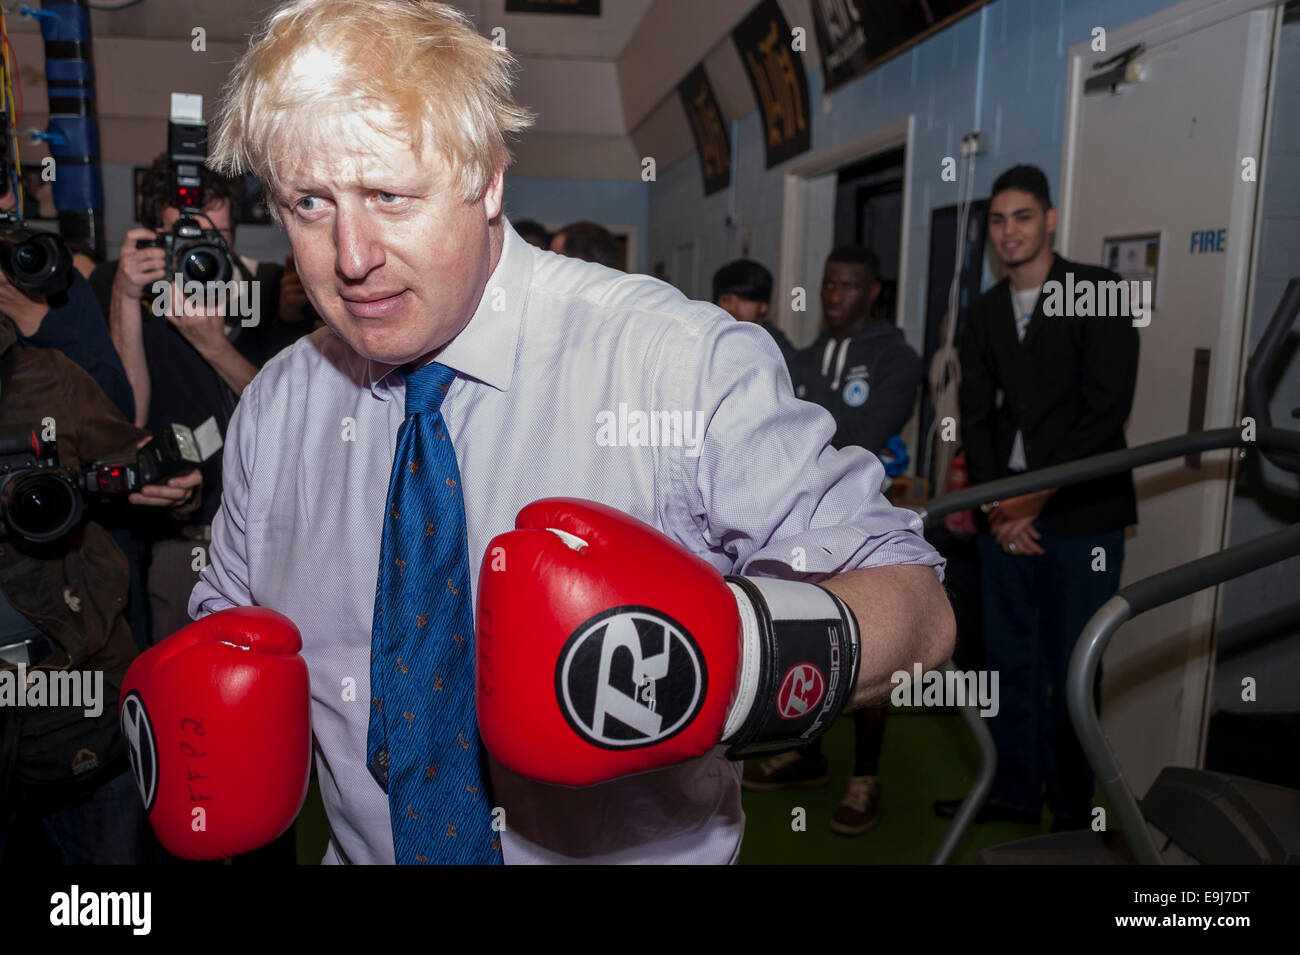 London, UK. 28th October, 2014. The Mayor of London, Boris Johnson visited a training session at Fight for Peace Academy in North Woolwich, Newham where he met some of the young people being helped by the charity. Fight for Peace uses boxing and martial arts combined with education and personal development to realise the potential of young people in the borough at risk of crime and violence.  First established in Rio in 2000 by Luke Dowdney MBE, it was replicated in Newham in 2007and is now expanding globally.  Pictured :  the Mayor enters the ring.   Credit:  Stephen Chung/Alamy Live News Stock Photo